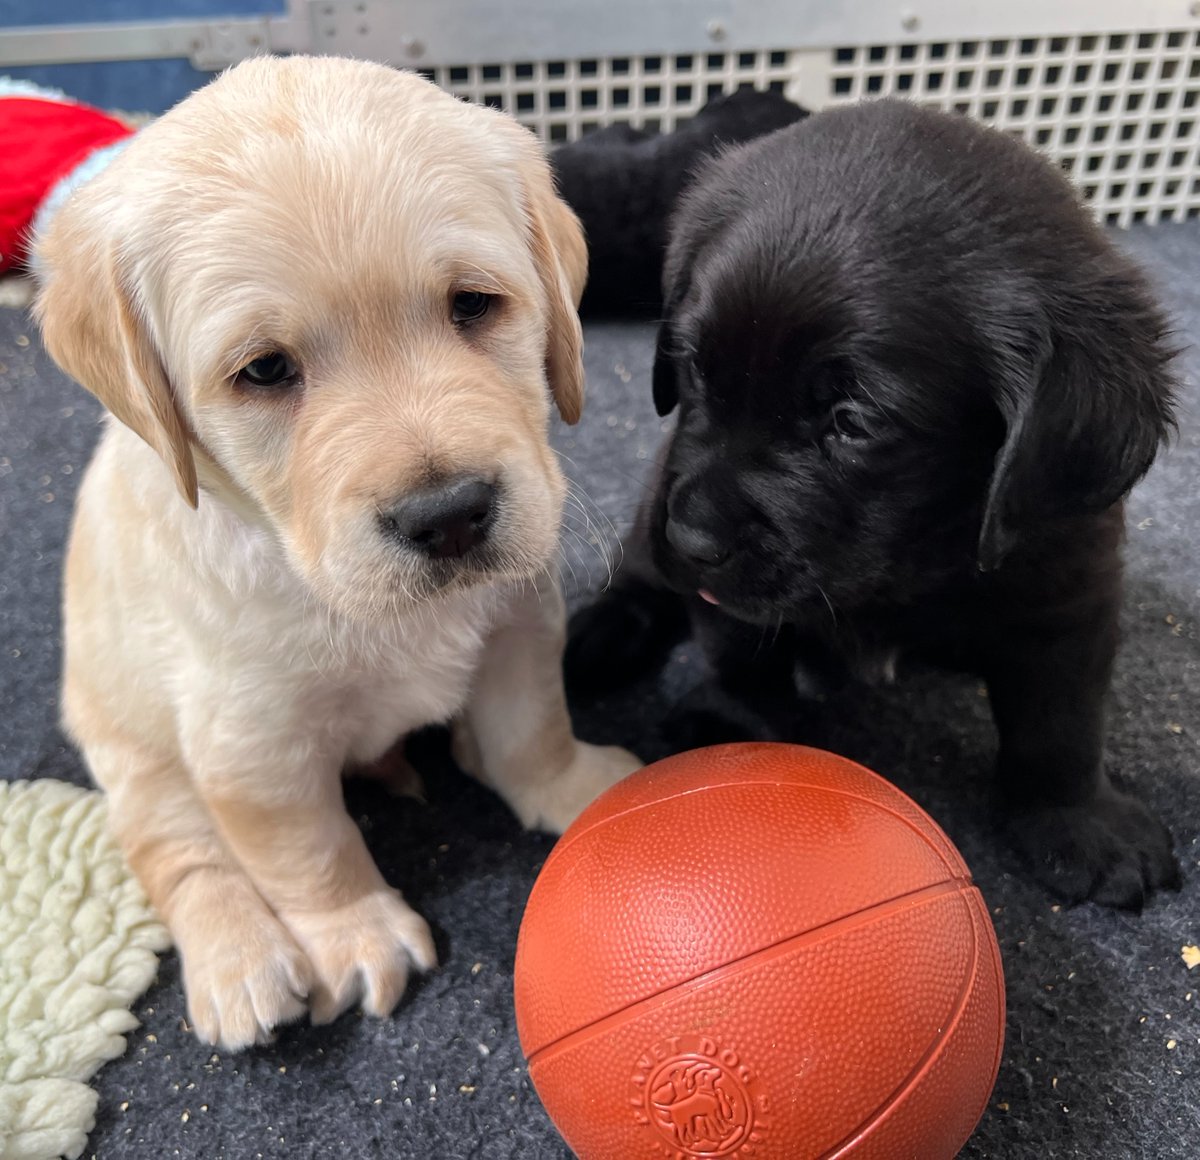 Who do you think is going to take the #MarchMadness crown this year? 🏀 Tell us your pick in the comments! ⤵️ #finalfour #basketball #NCAA #basketballgame #puppies @NCAA @NCAAChamps @MarchMadnessMBB